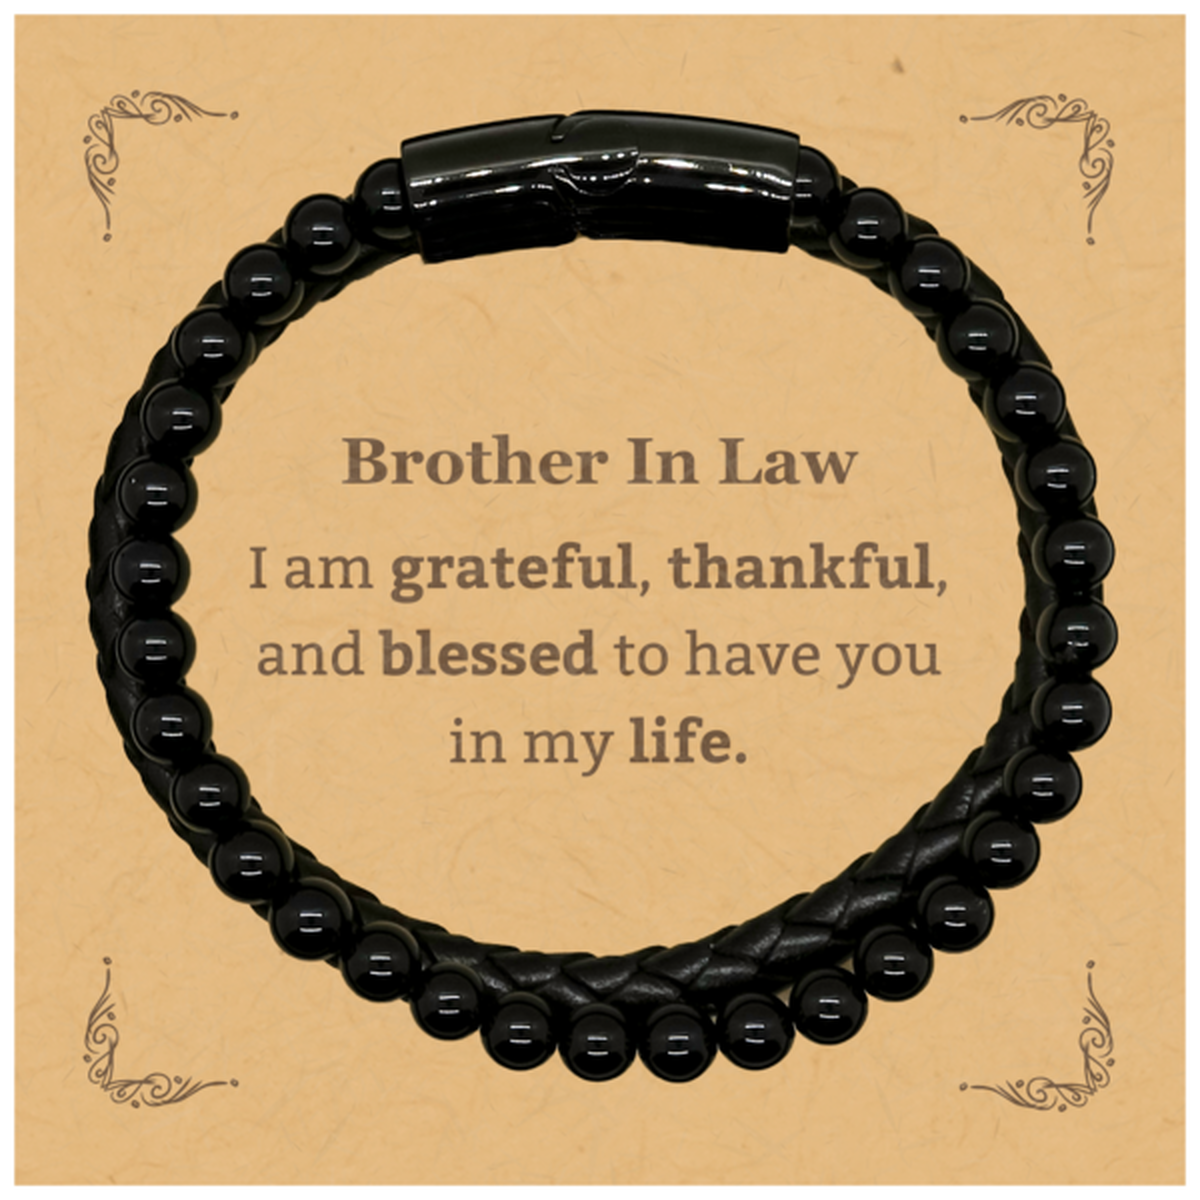 Brother In Law Appreciation Gifts, I am grateful, thankful, and blessed, Thank You Stone Leather Bracelets for Brother In Law, Birthday Inspiration Gifts for Brother In Law